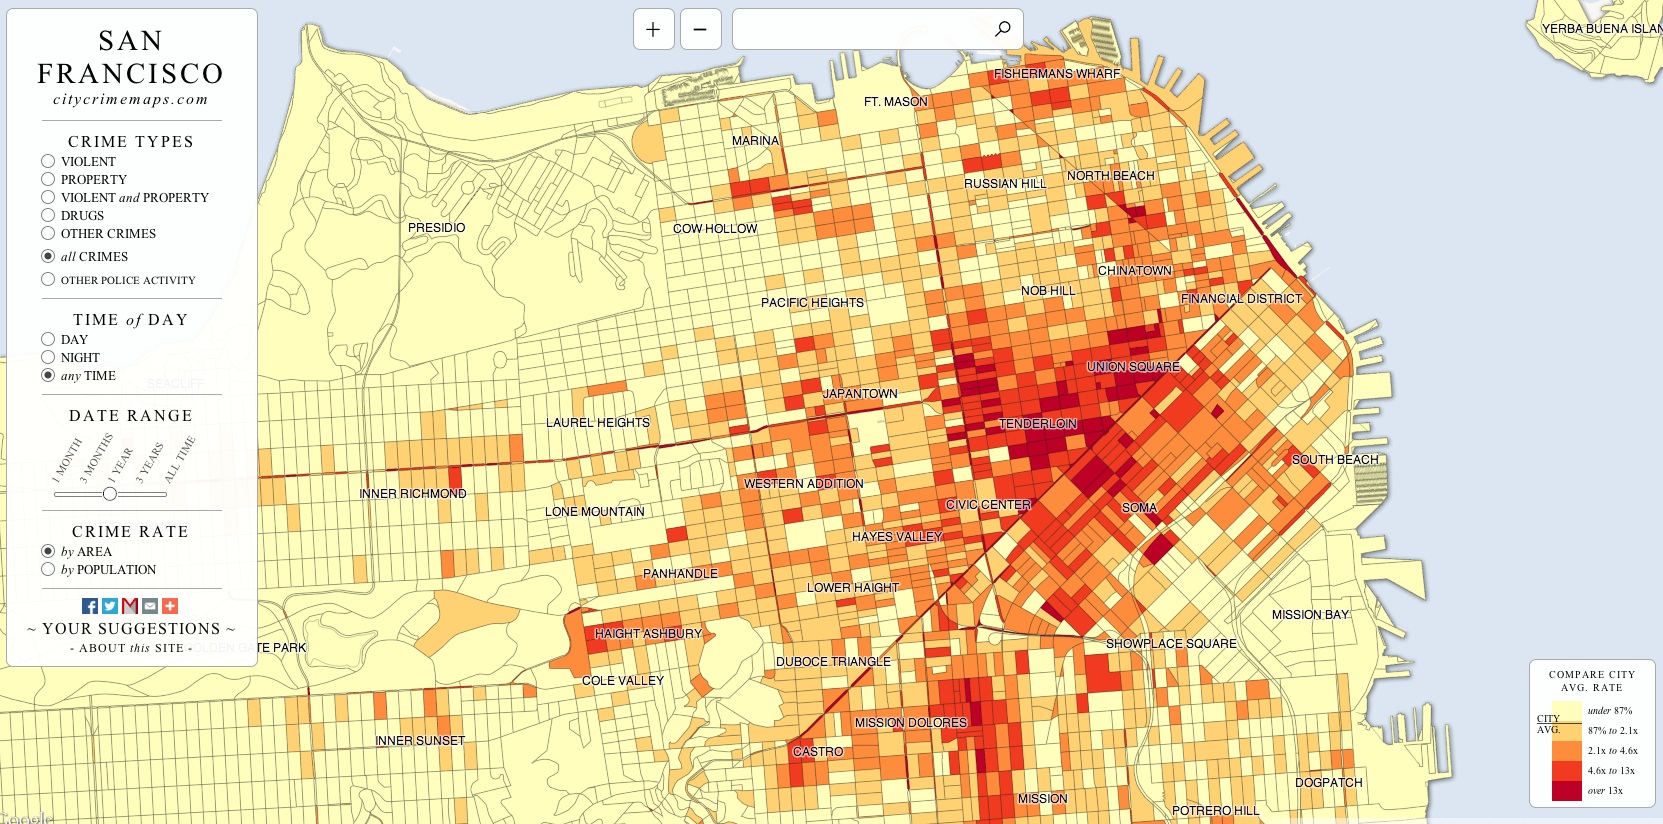 San Francisco Drug Dealing, Violent and Property Crimes…All In One Map the ...